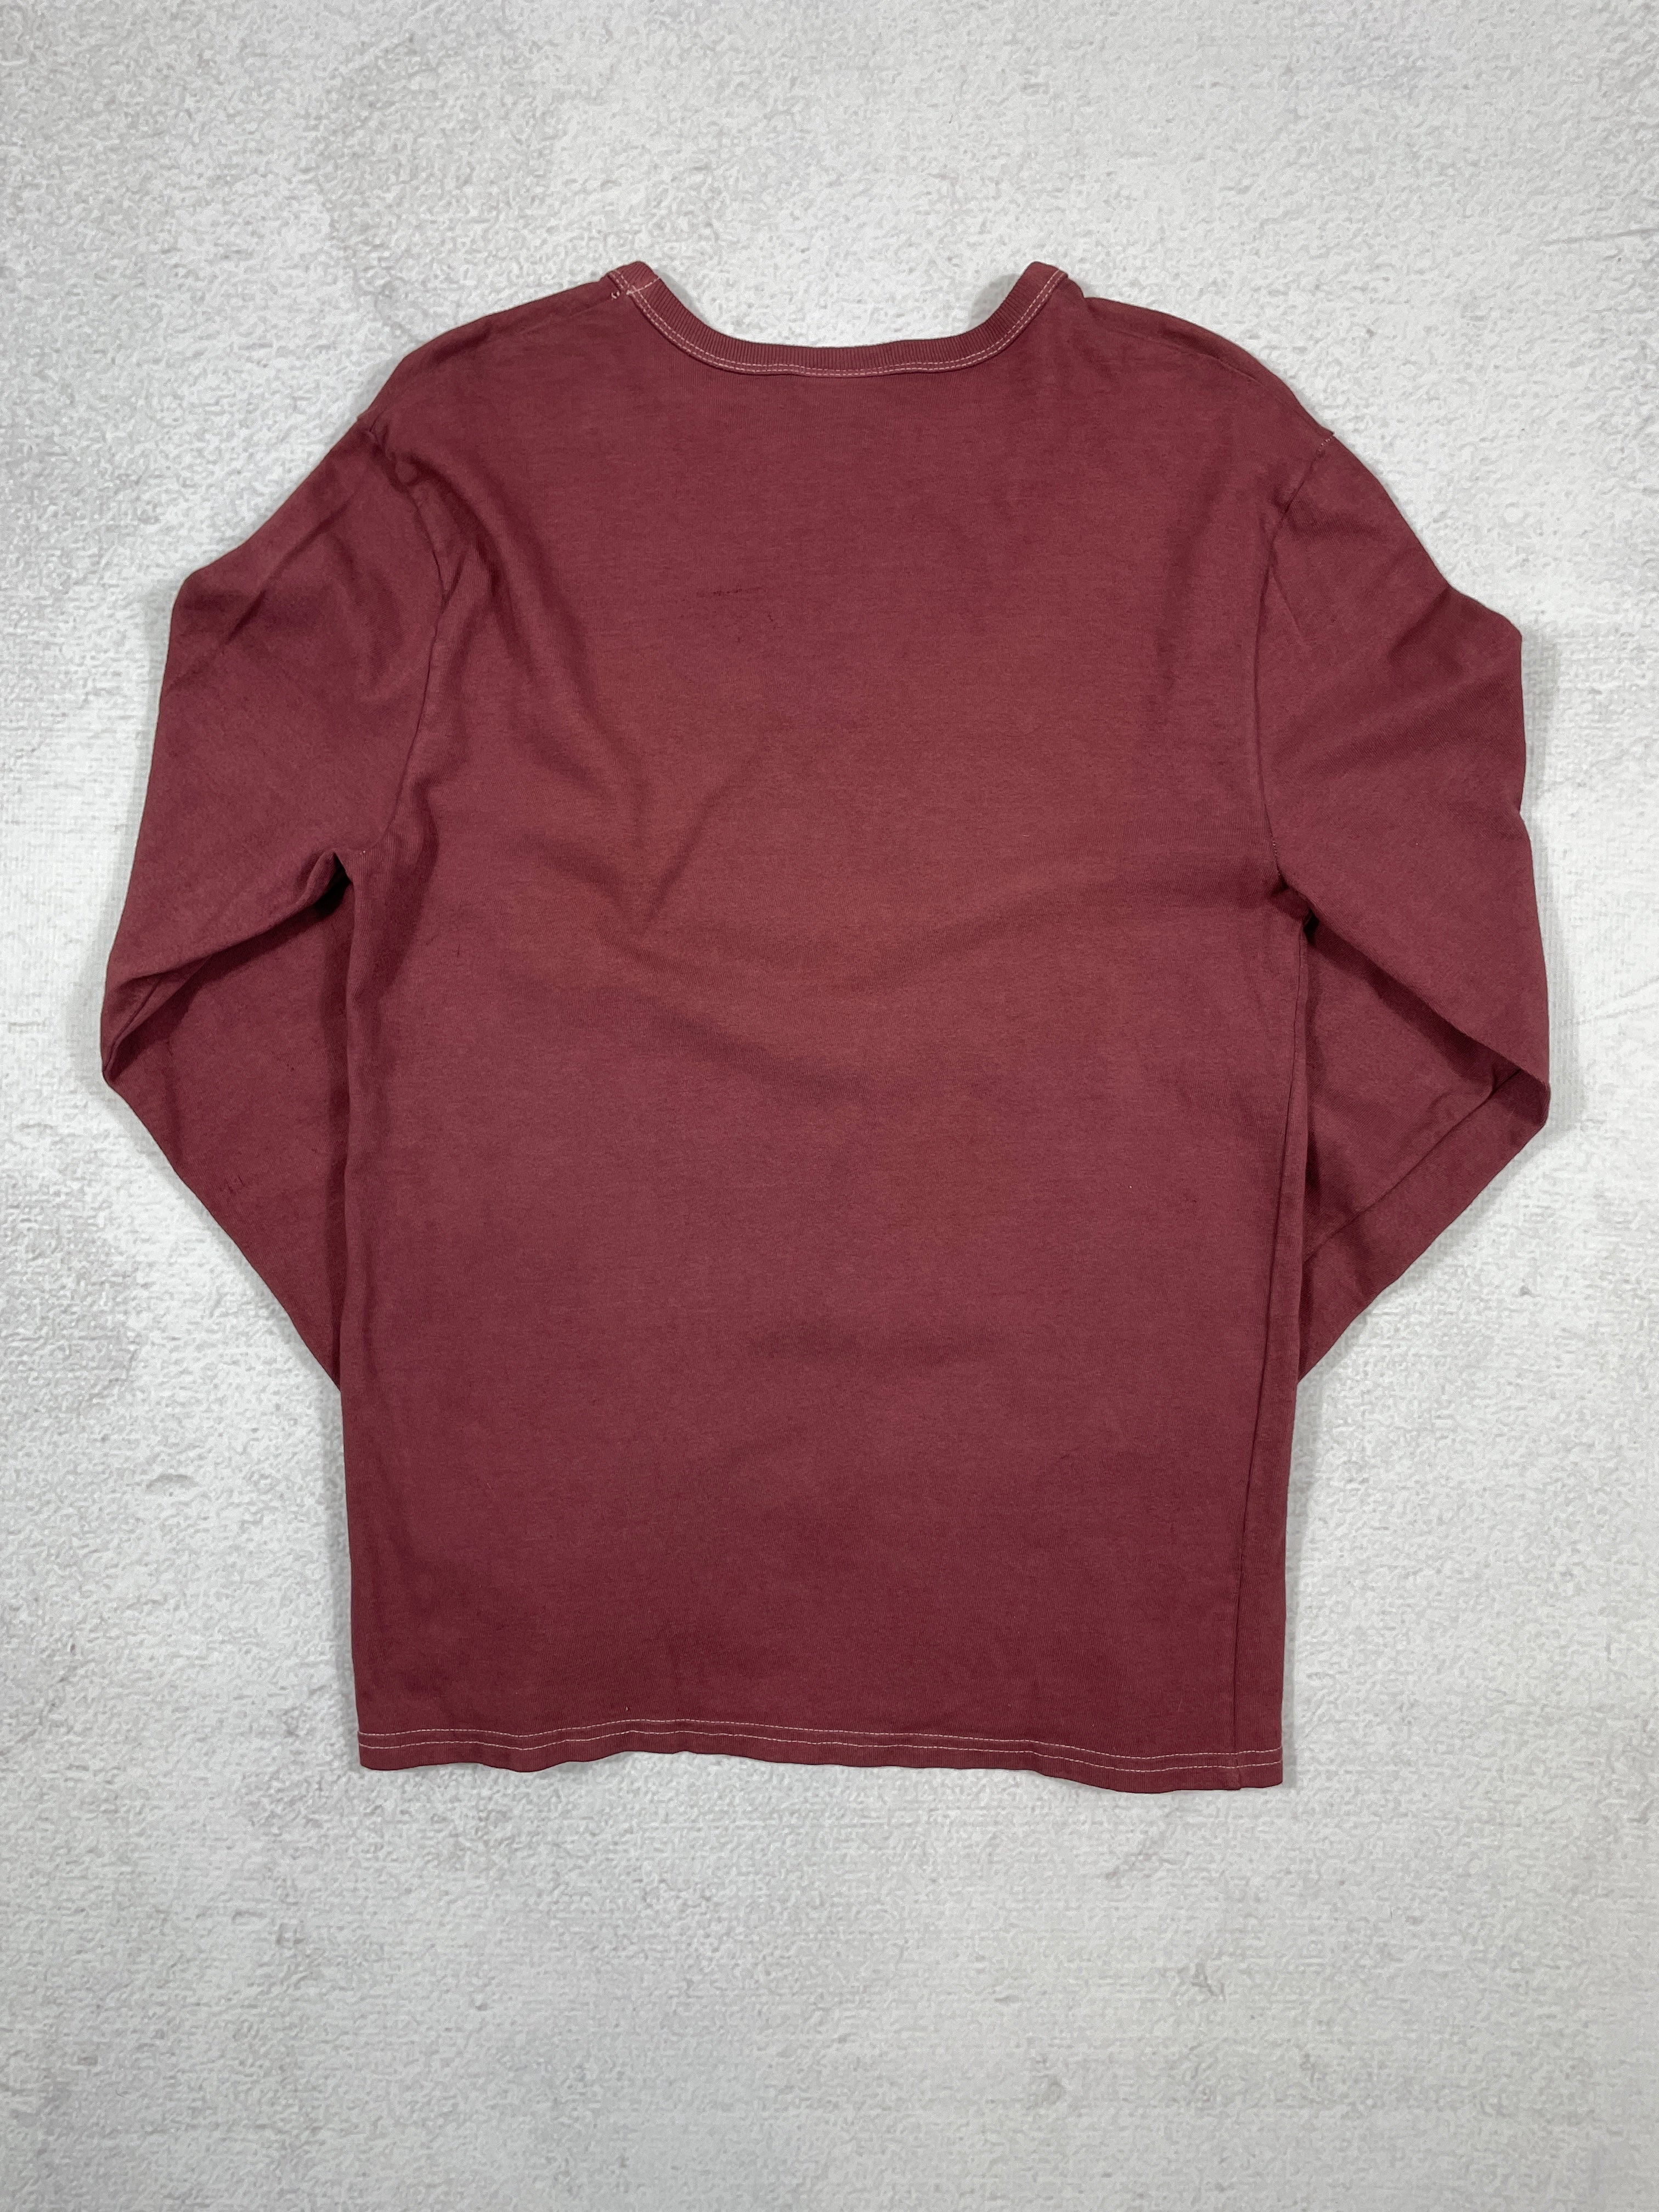 Vintage Dyed Champion Long-Sleeve T-Shirt - Men's Small